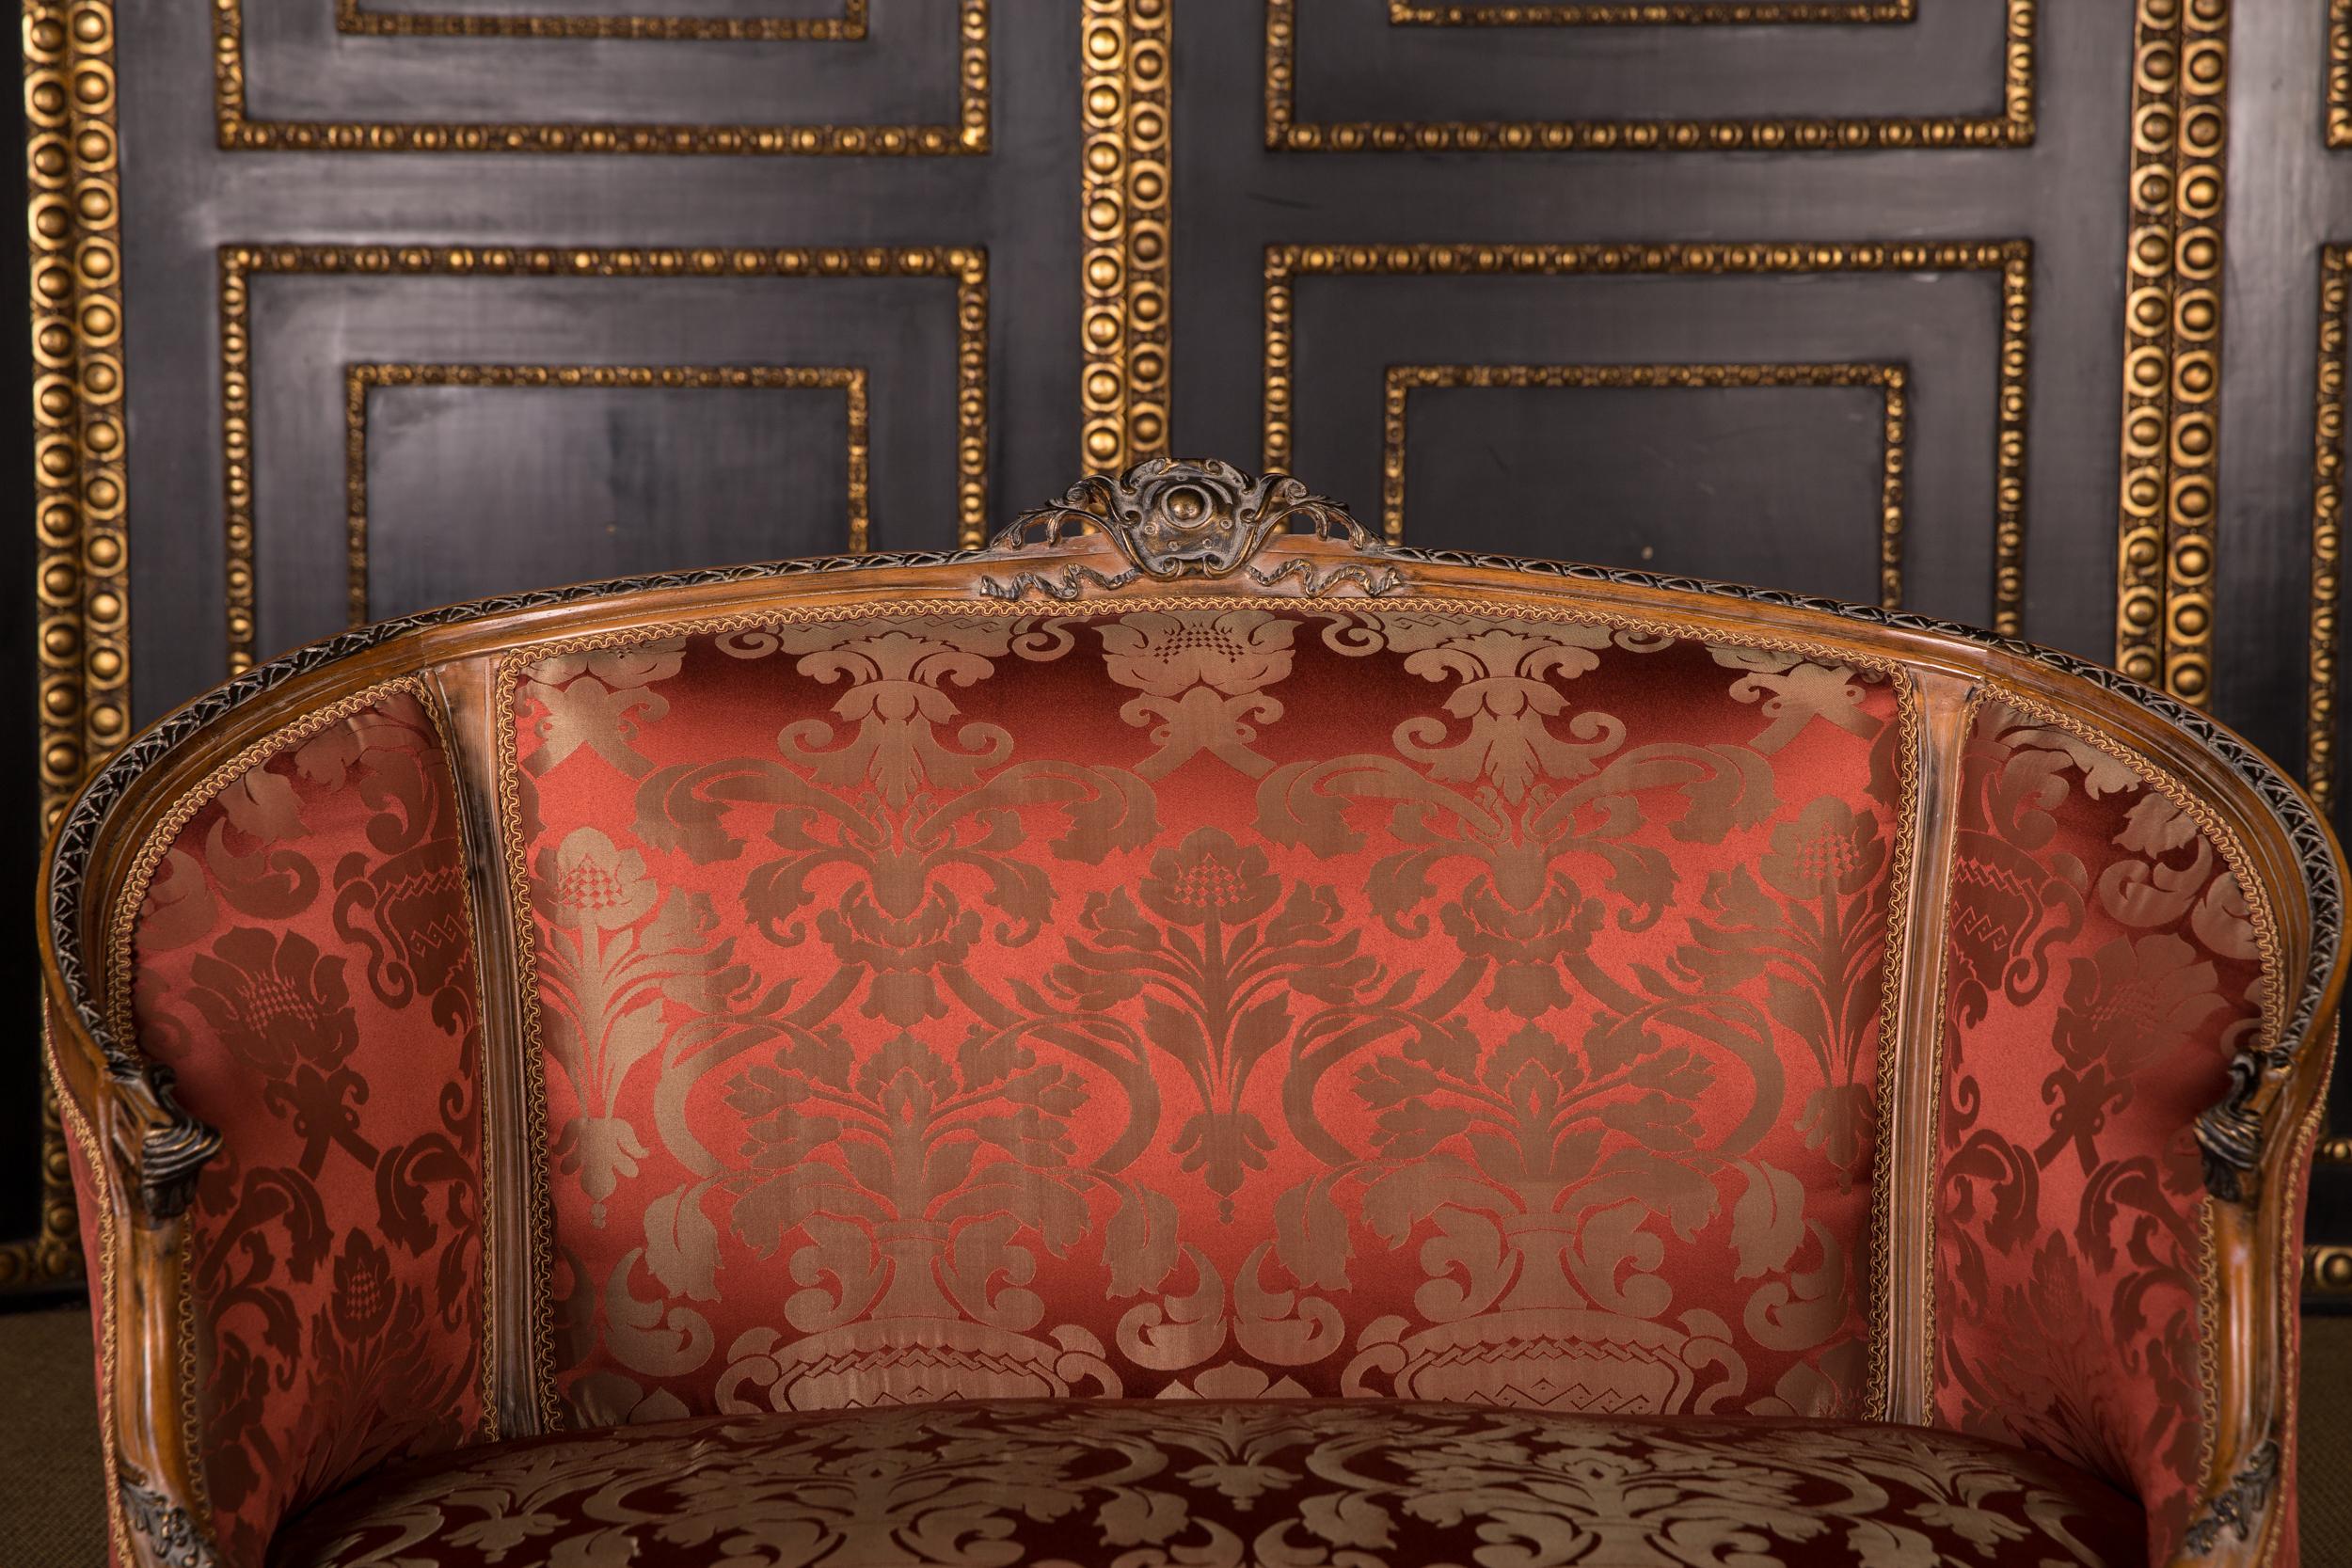 Louis XVI French Sofa Kanapee Canape in Louis Seize Style with Red Ornamental Upholstery